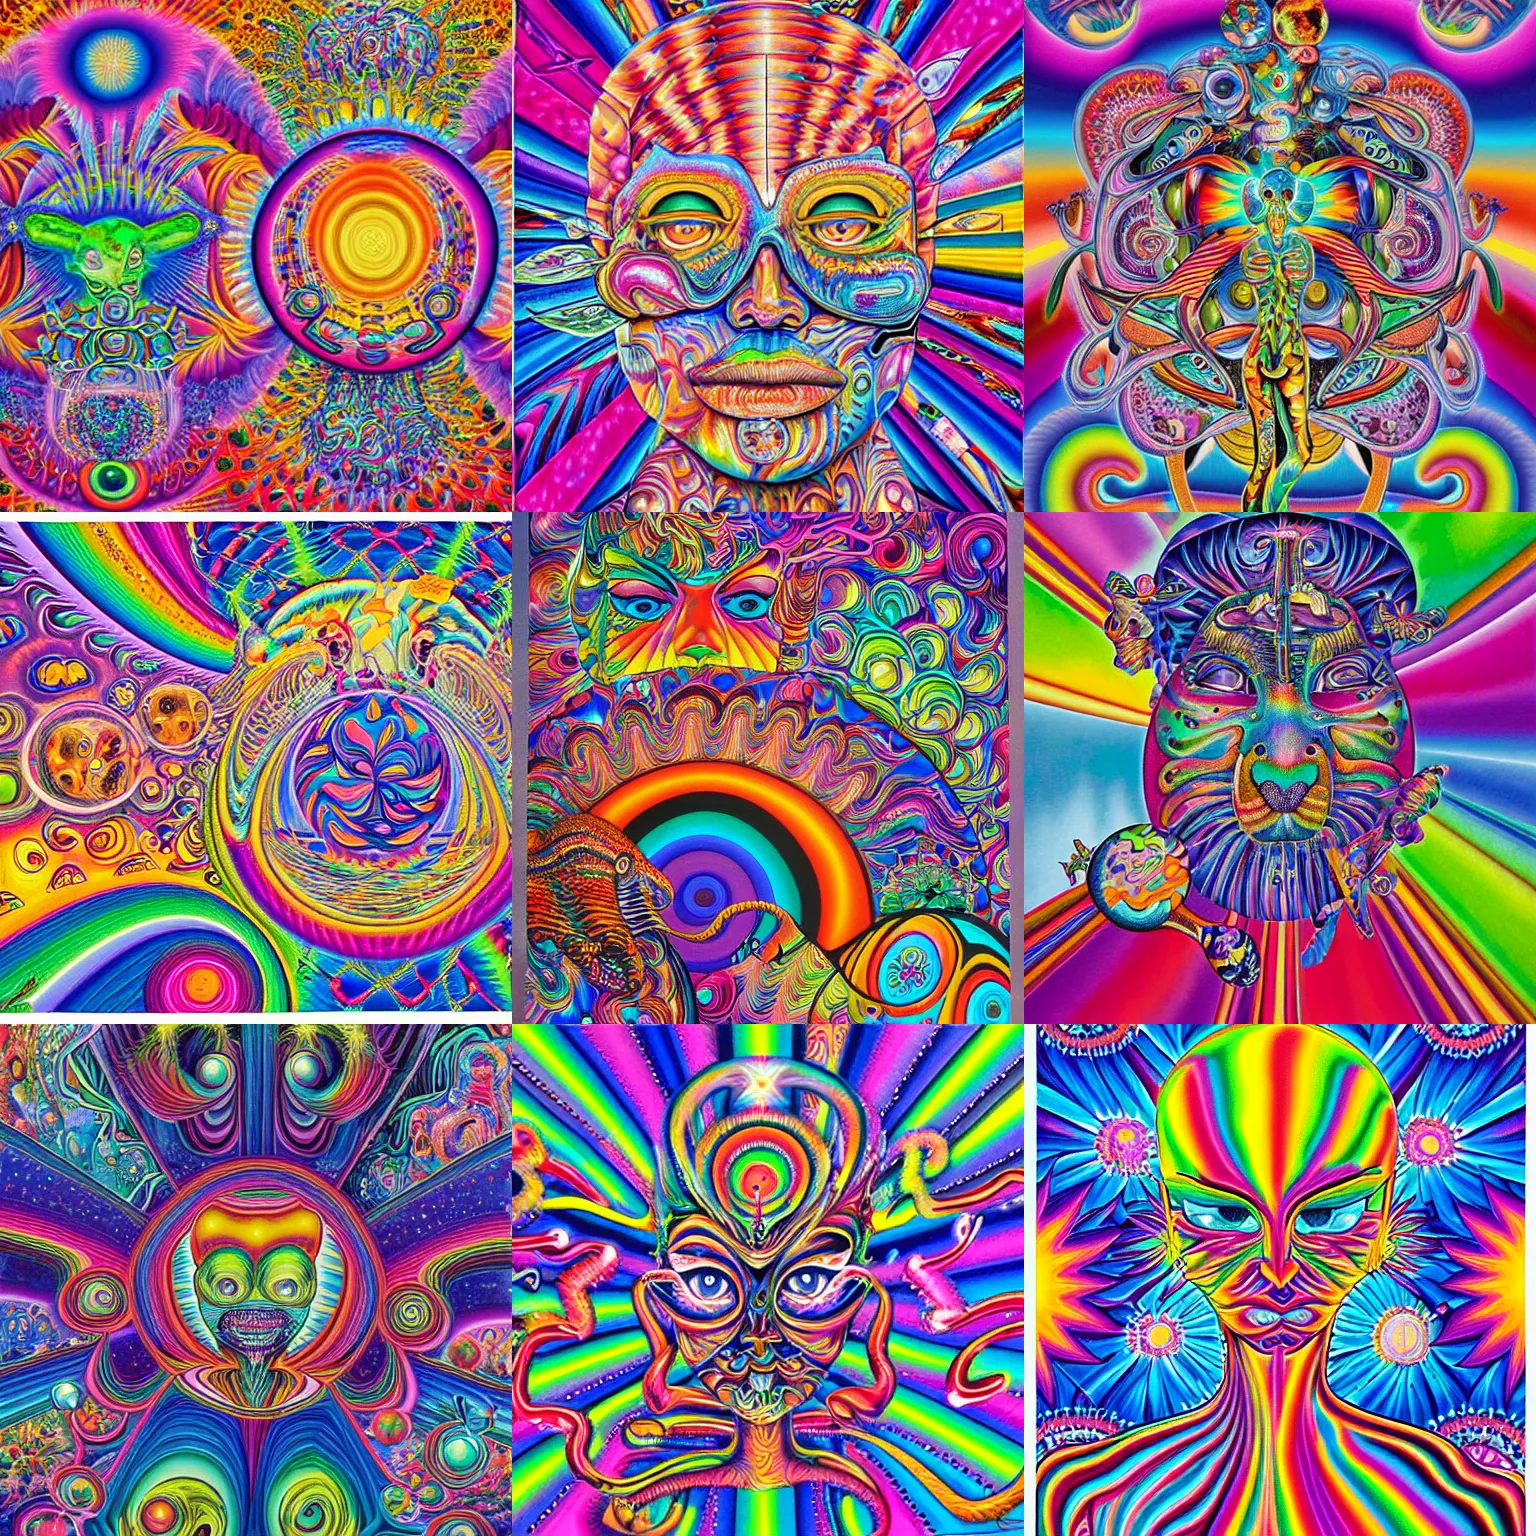 Prompt: lisa frank painting by alex grey, android jones, chris dyer, and aaron brooks